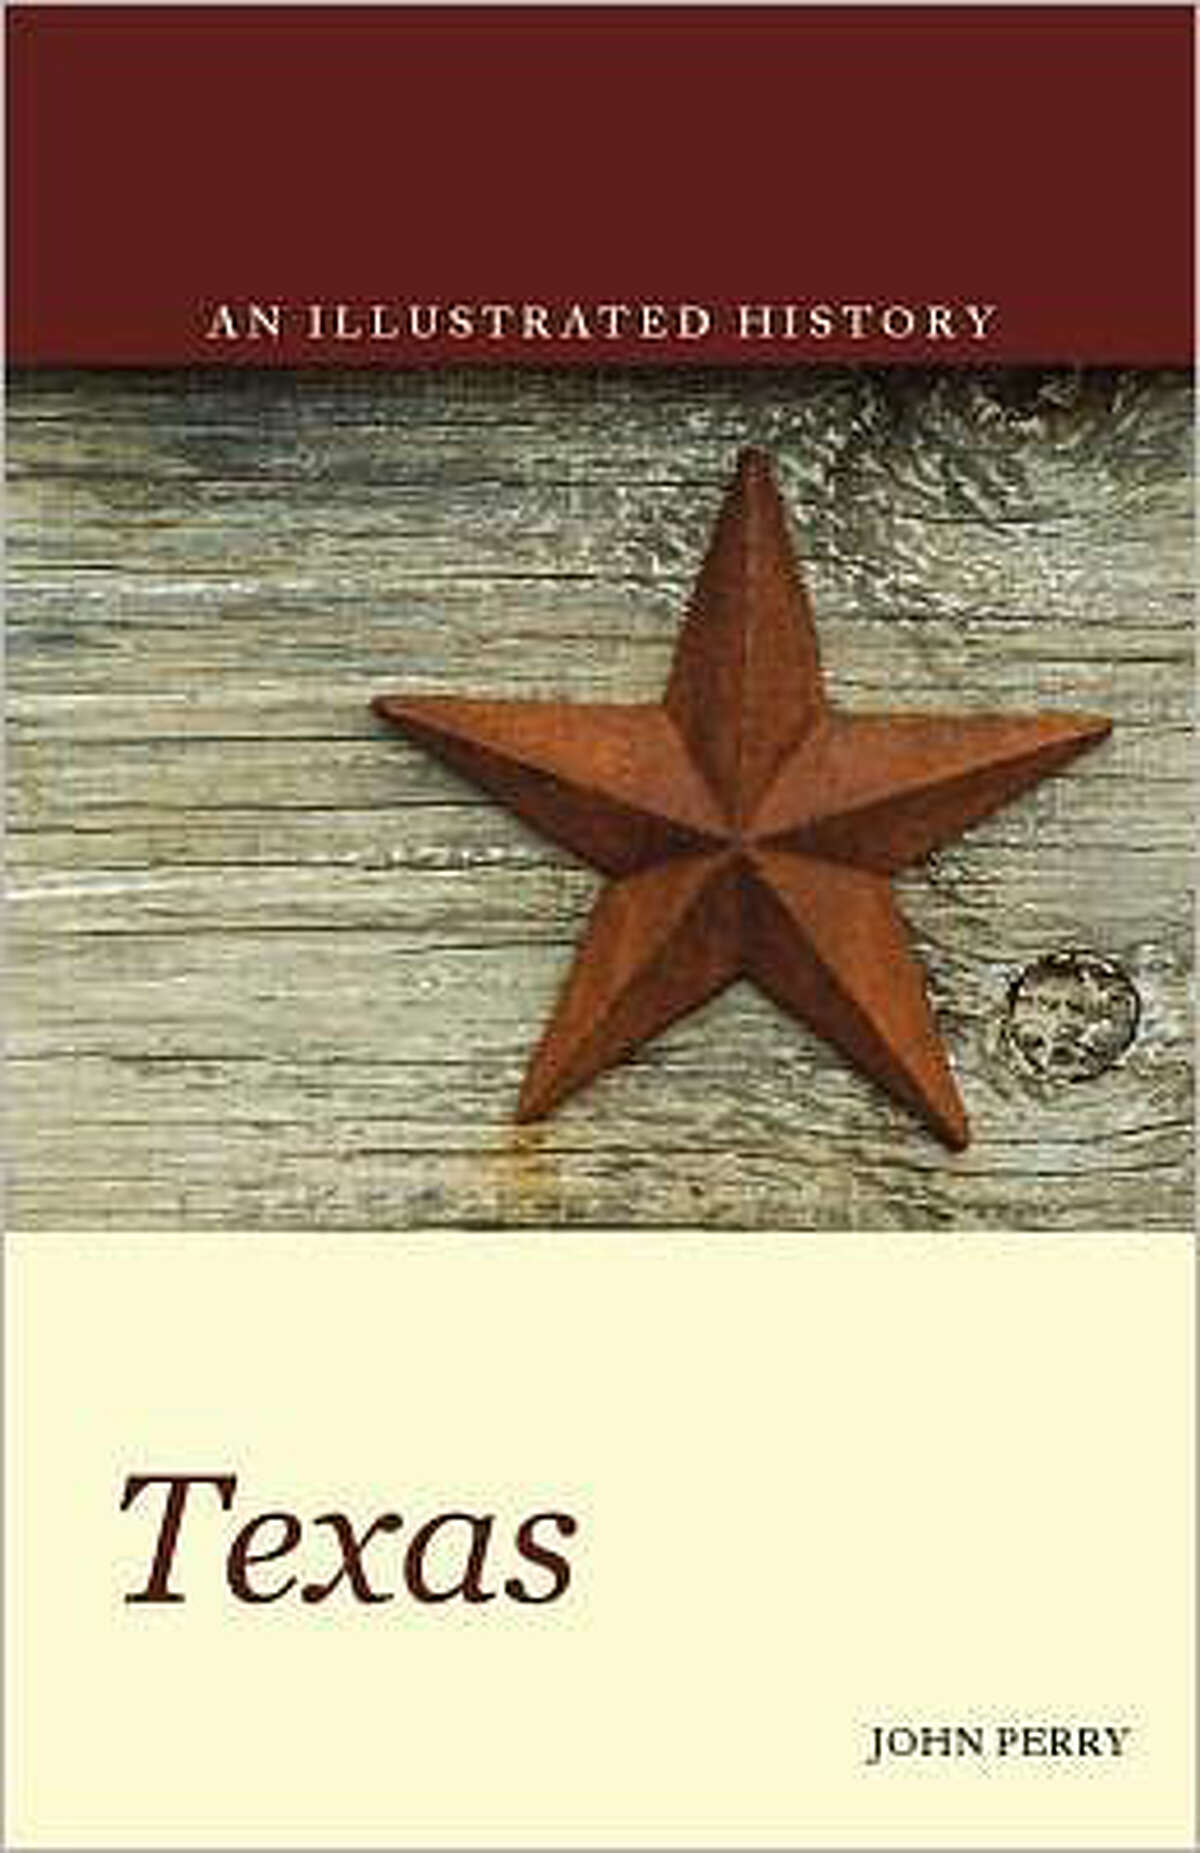 "Texas: An Illustrated History" by John Perry